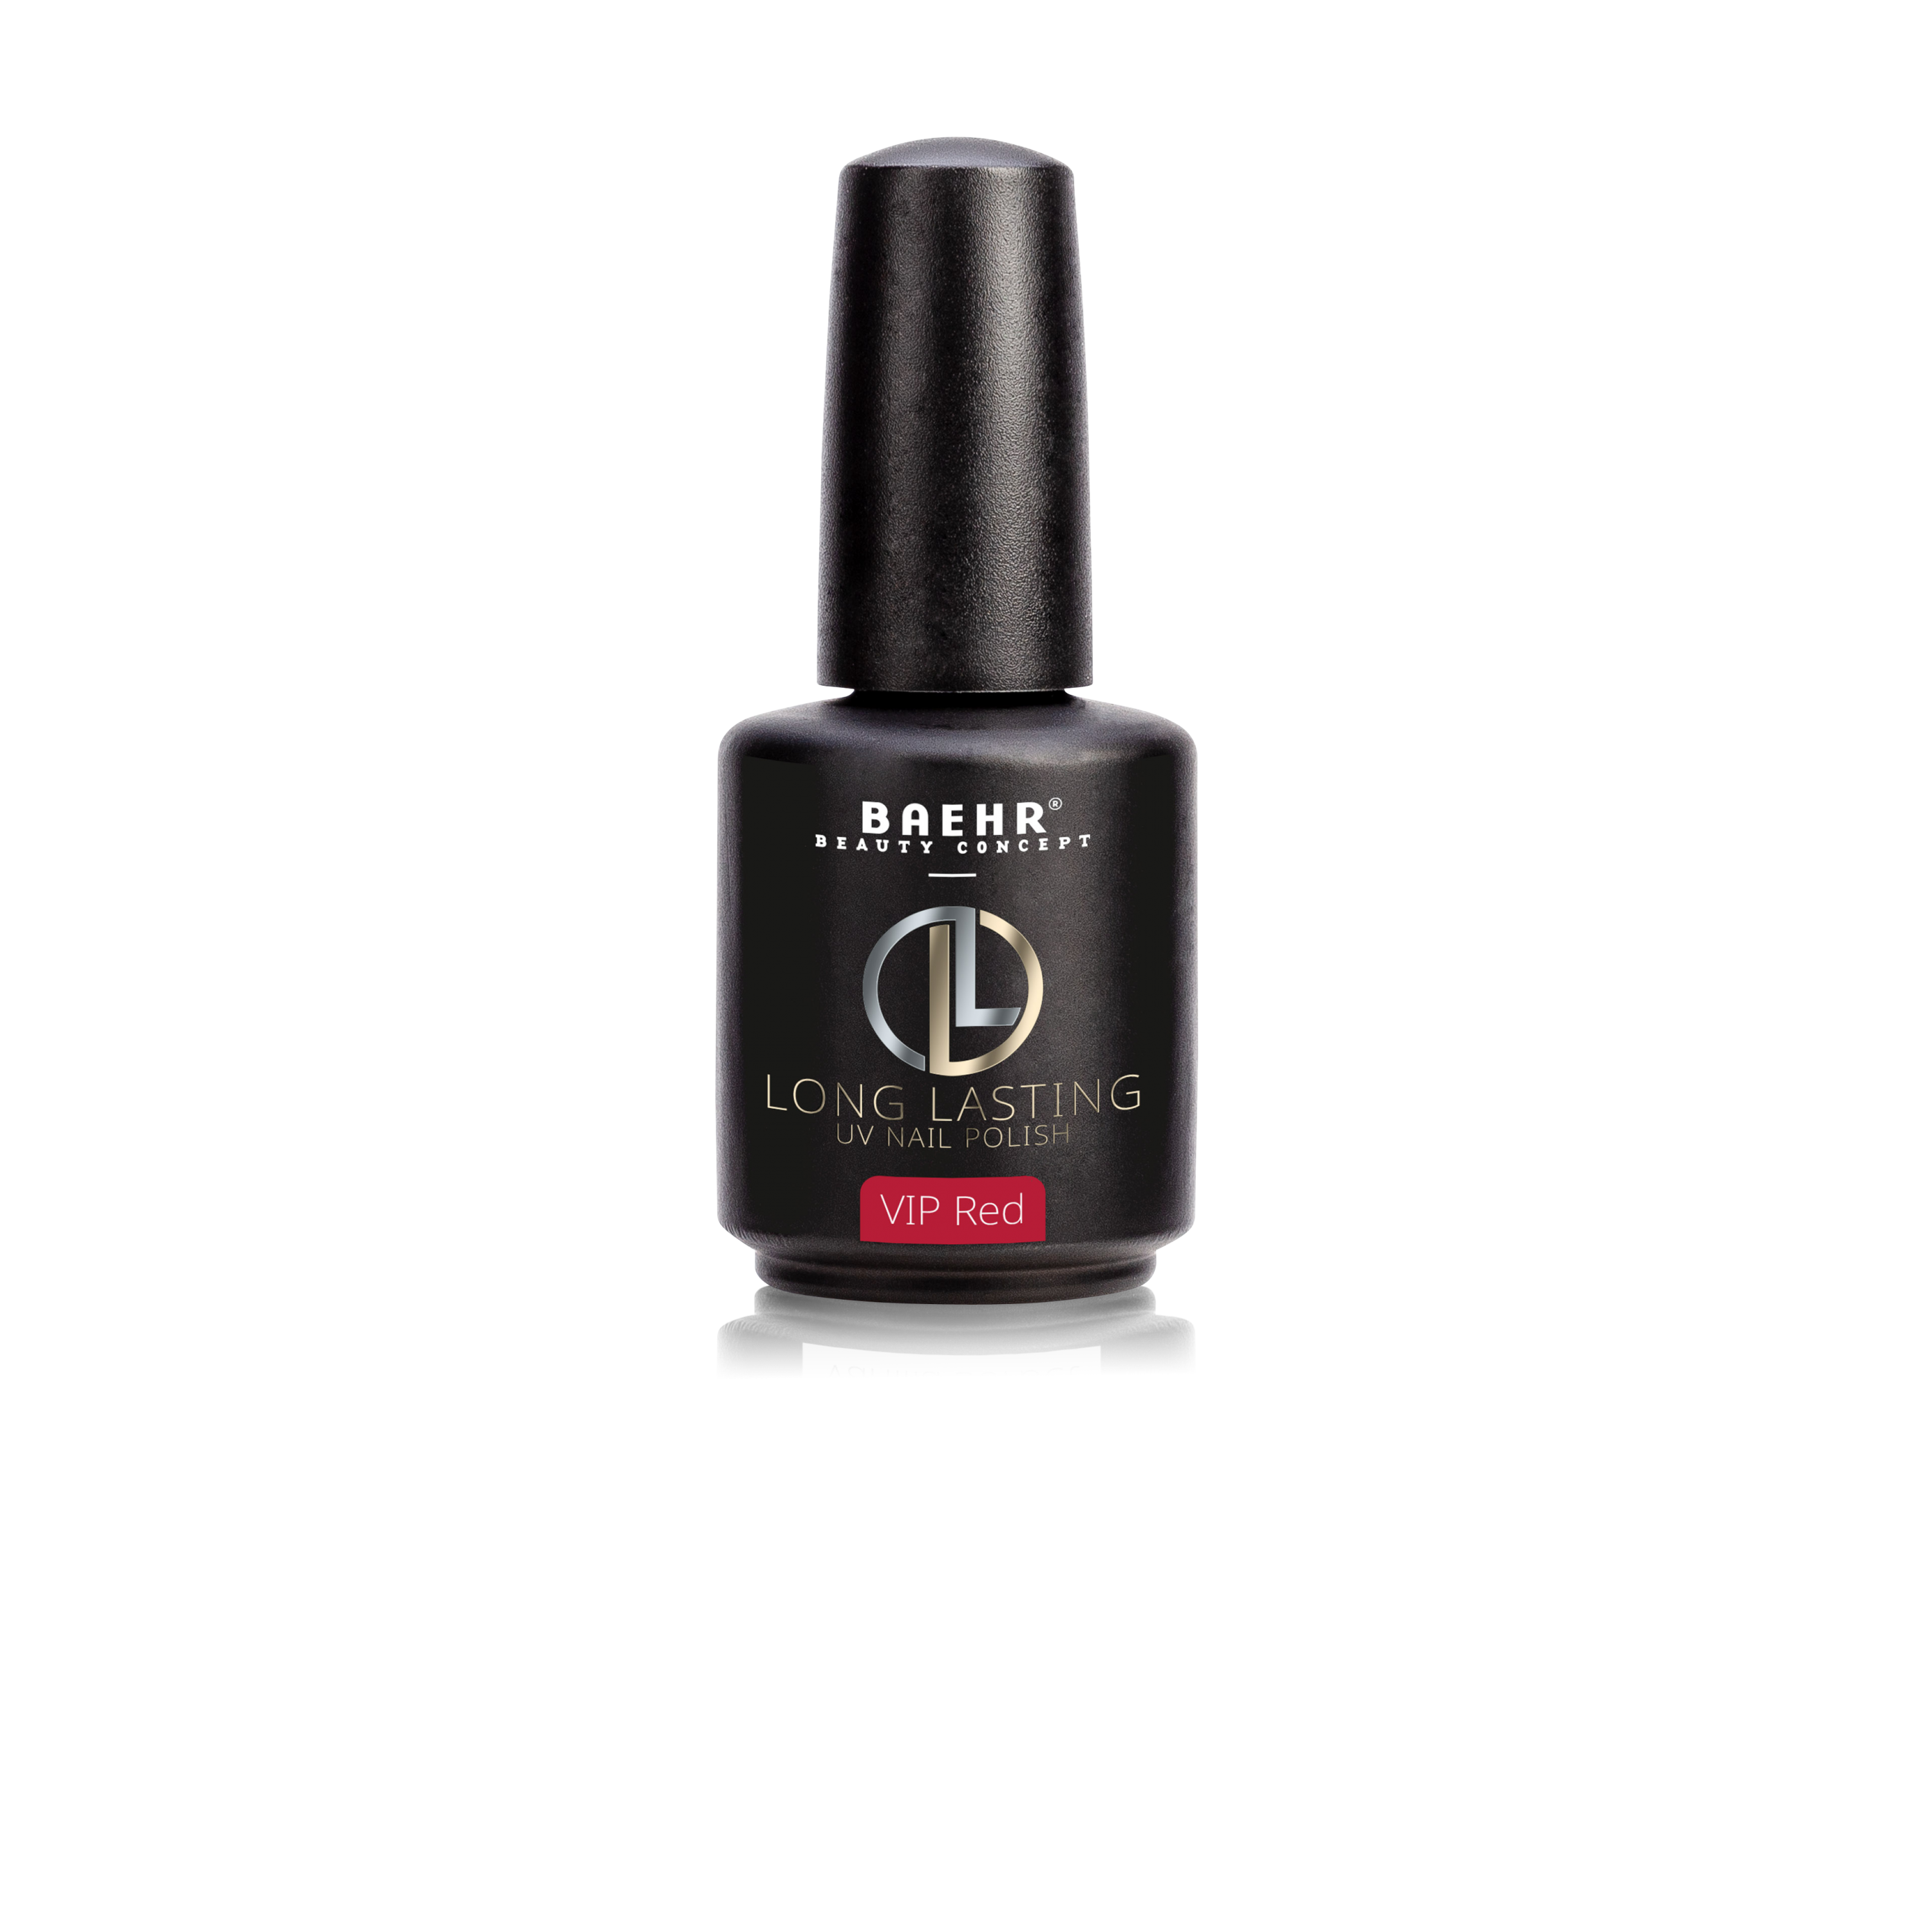 BAEHR BEAUTY CONCEPT - NAILS Long-Lasting VIP Red 12 ml